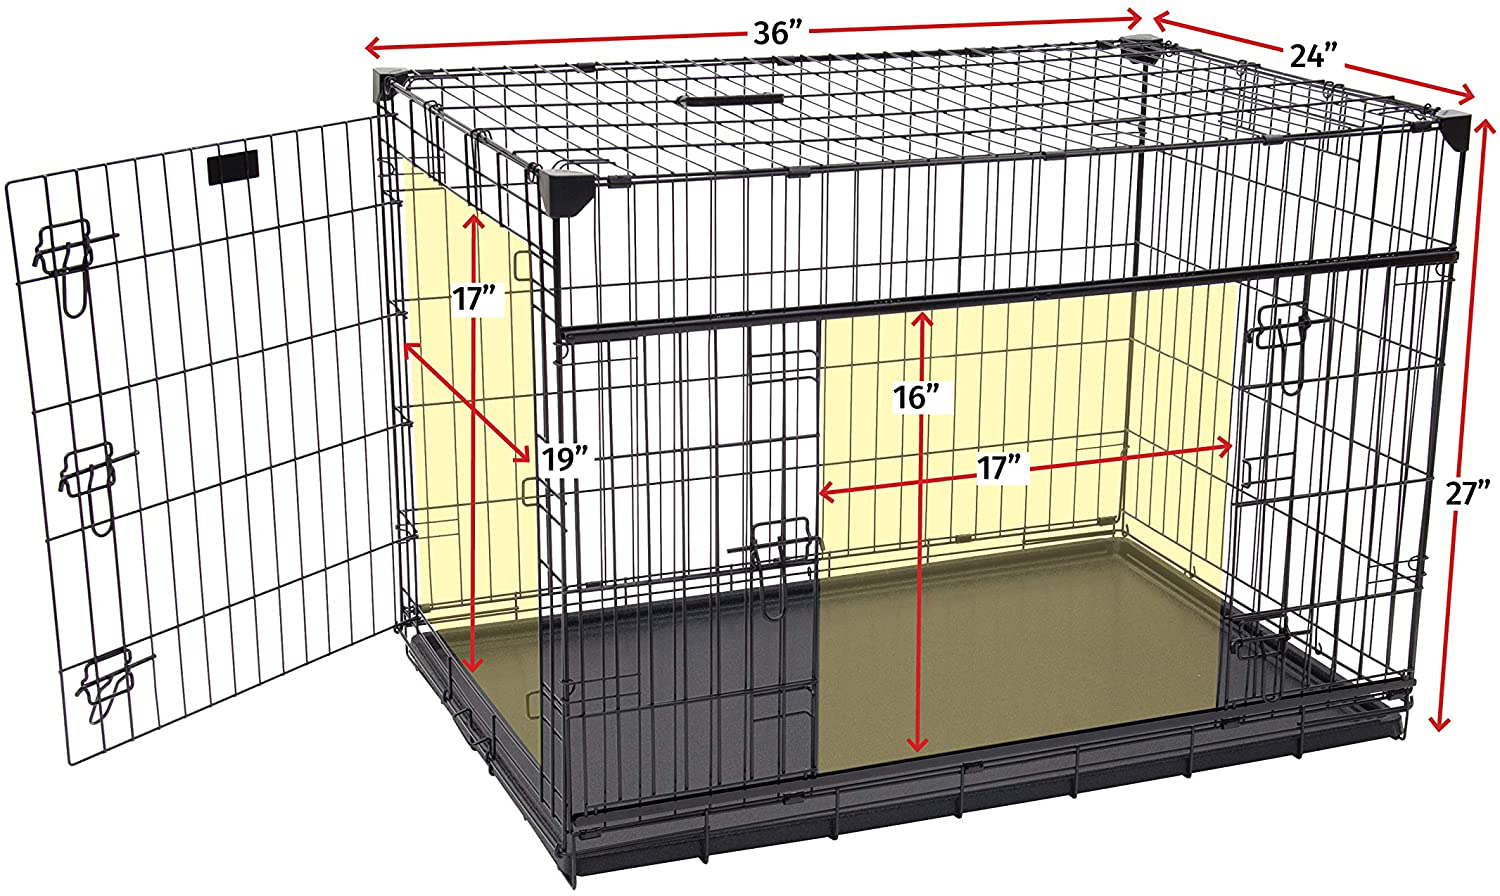 Lucky Dog 36” (M/L) Slyder Whisper Glide Sliding Door Dog Crate | 2Nd Side Door Access | Patented Corner Stabilizers | Removable Tray | Rubber Feet | Carrying Handle Animals & Pet Supplies > Pet Supplies > Dog Supplies > Dog Kennels & Runs Lucky Dog   